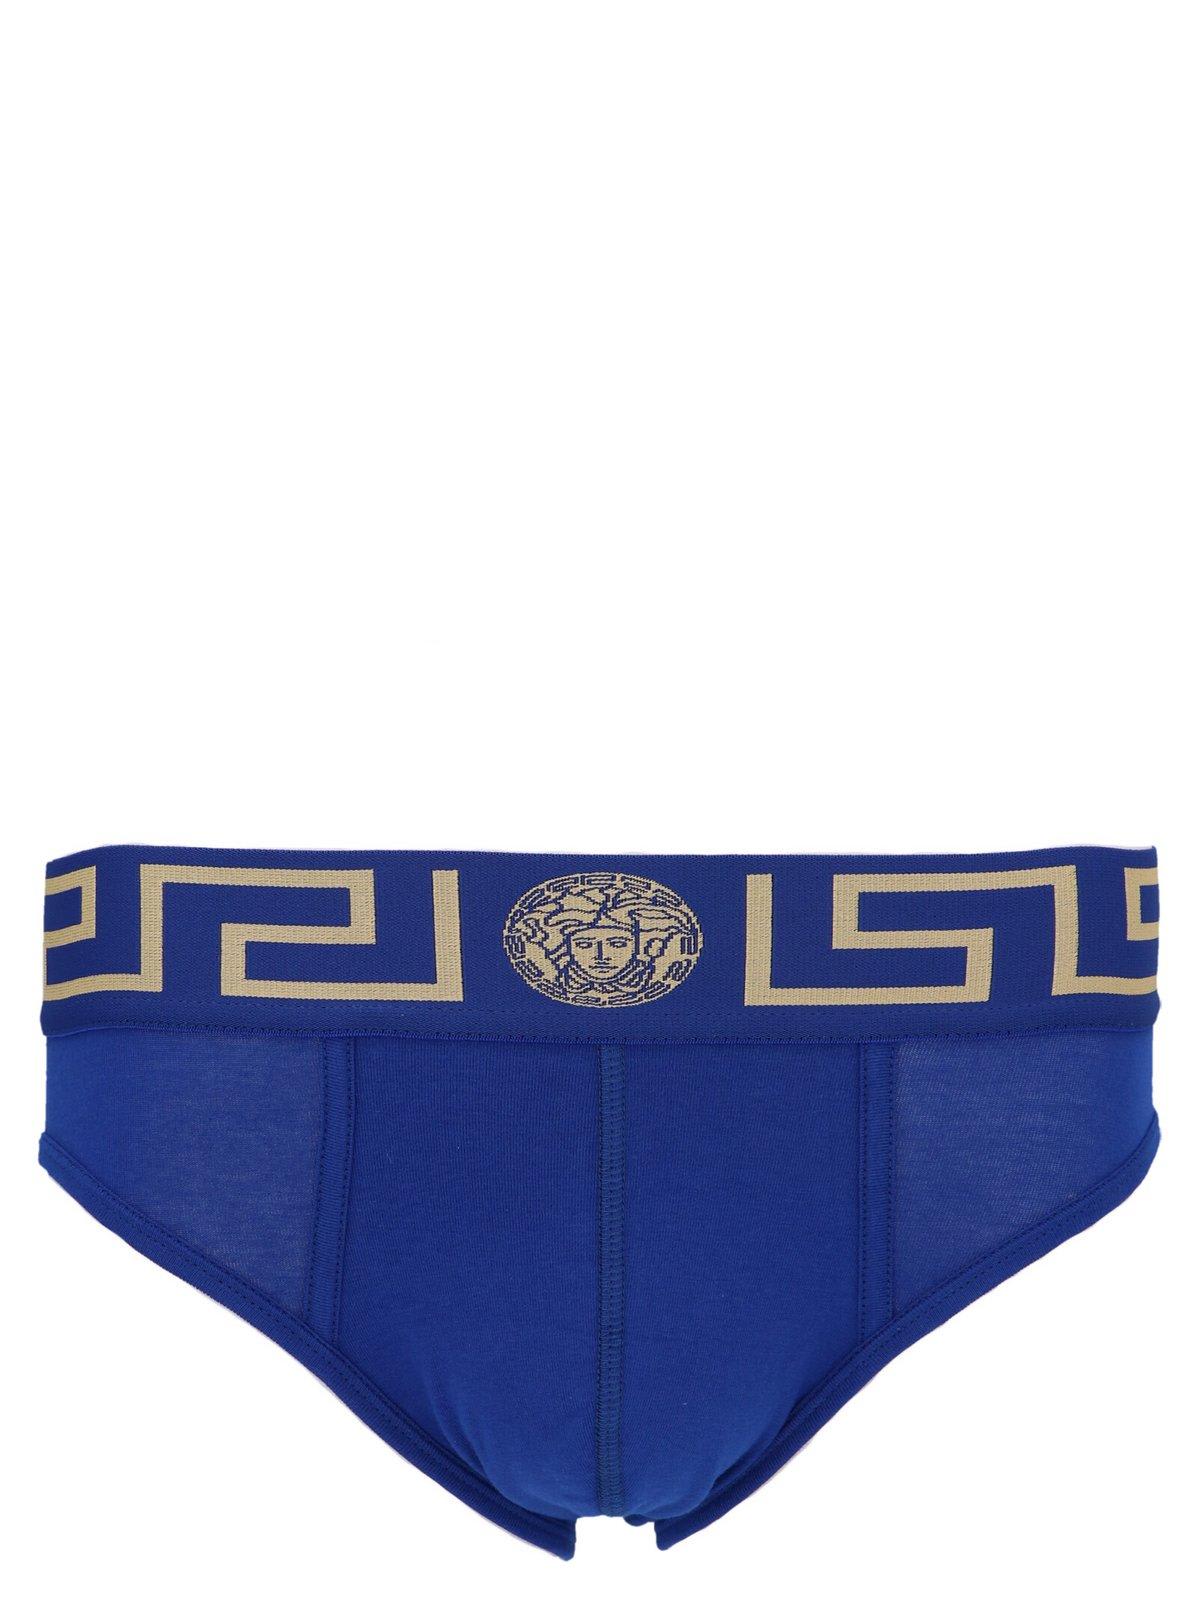 Versace Iconic Thong, Bluette/gold